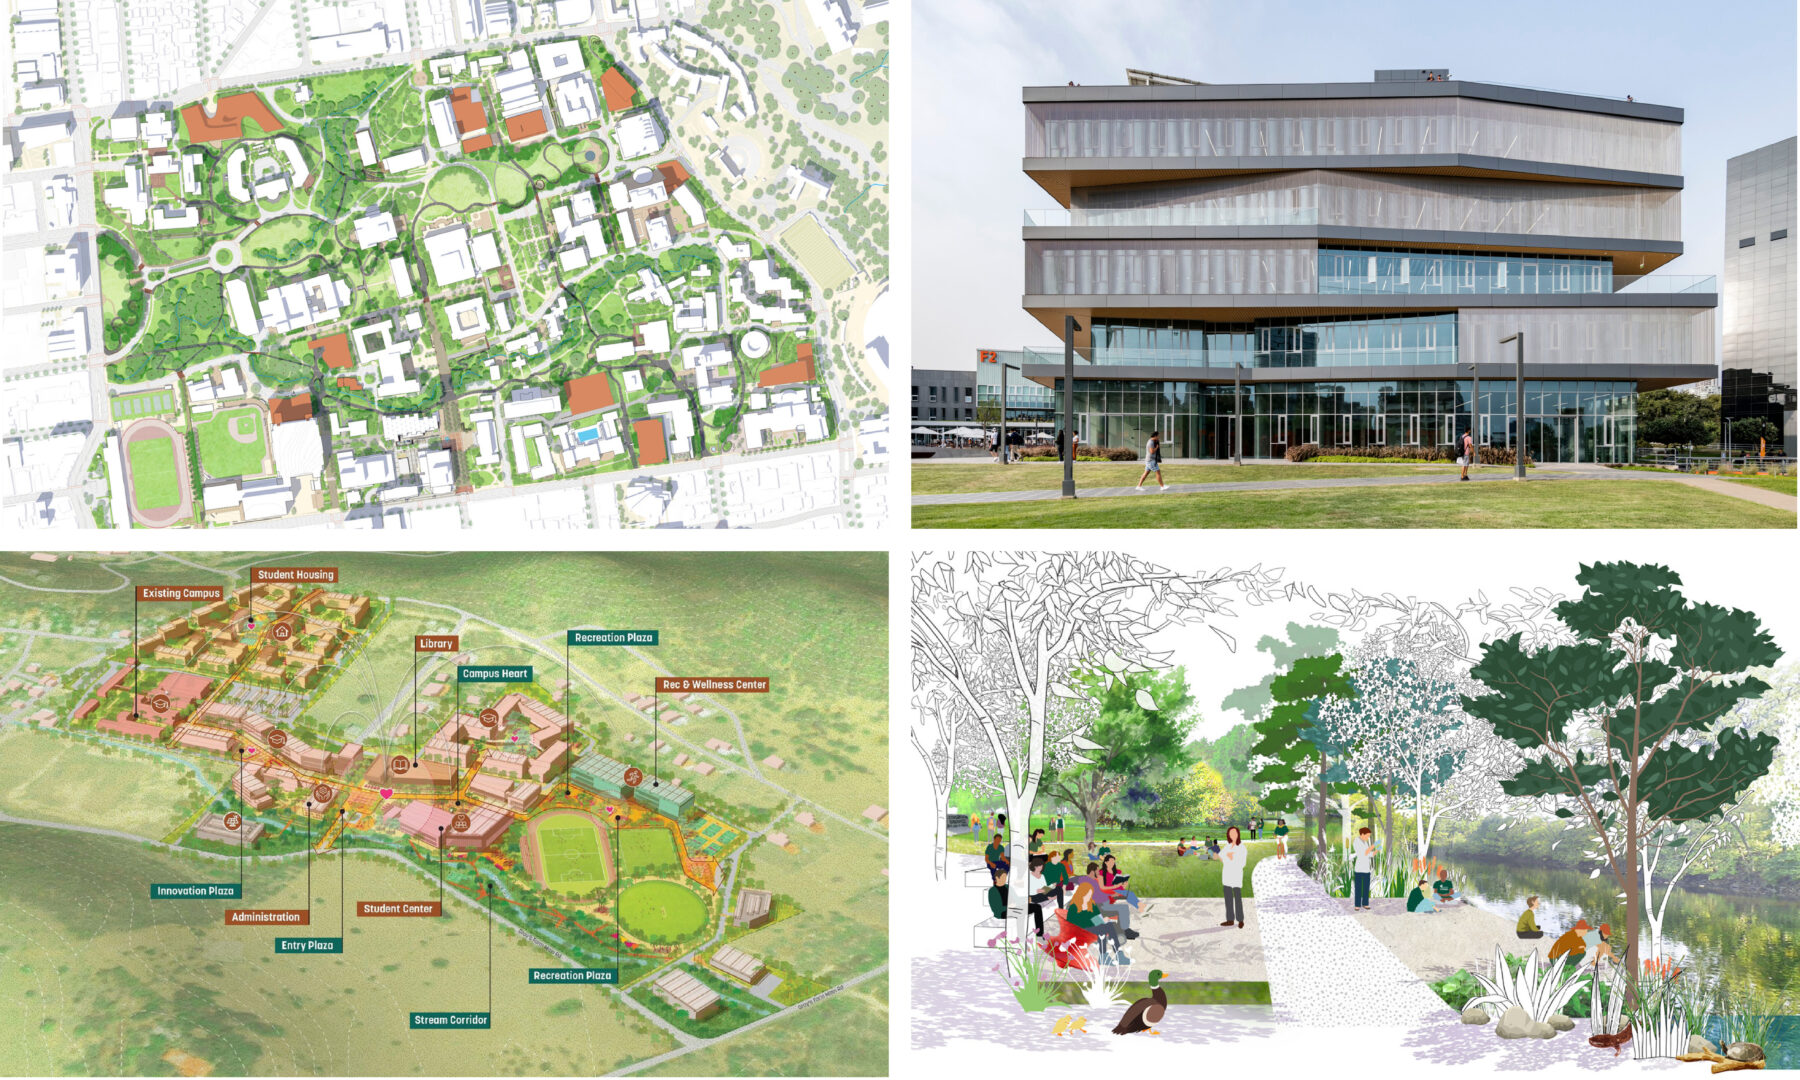 Composite collage with 4 images representing the four winning projects - a campus map, a building exterior, a labeled campus diagram, and a rendering of a campus landscape